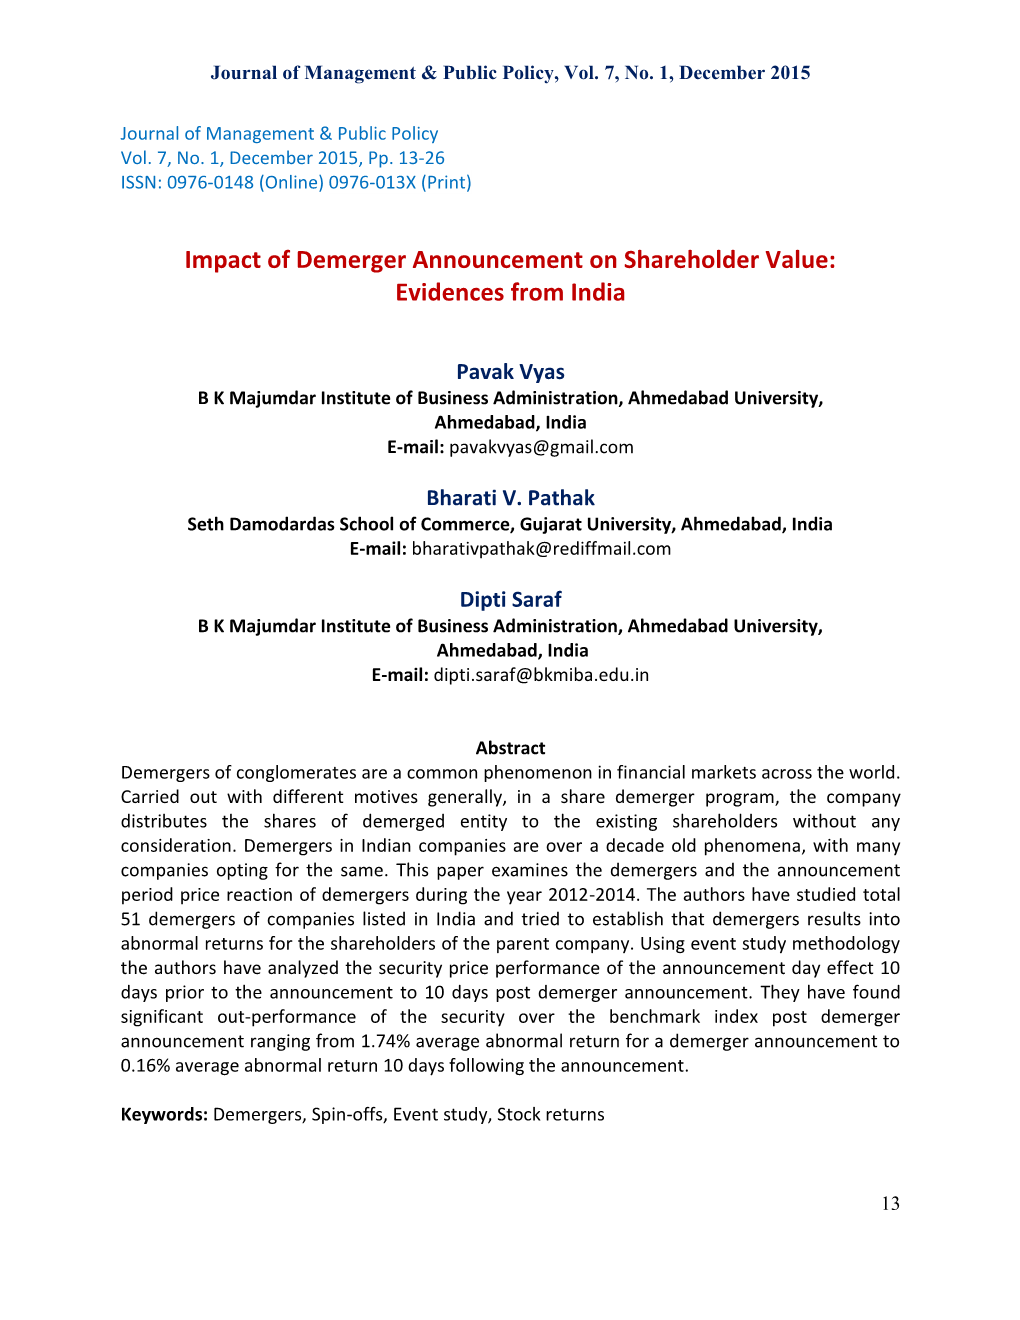 Impact of Demerger Announcement on Shareholder Value: Evidences from India